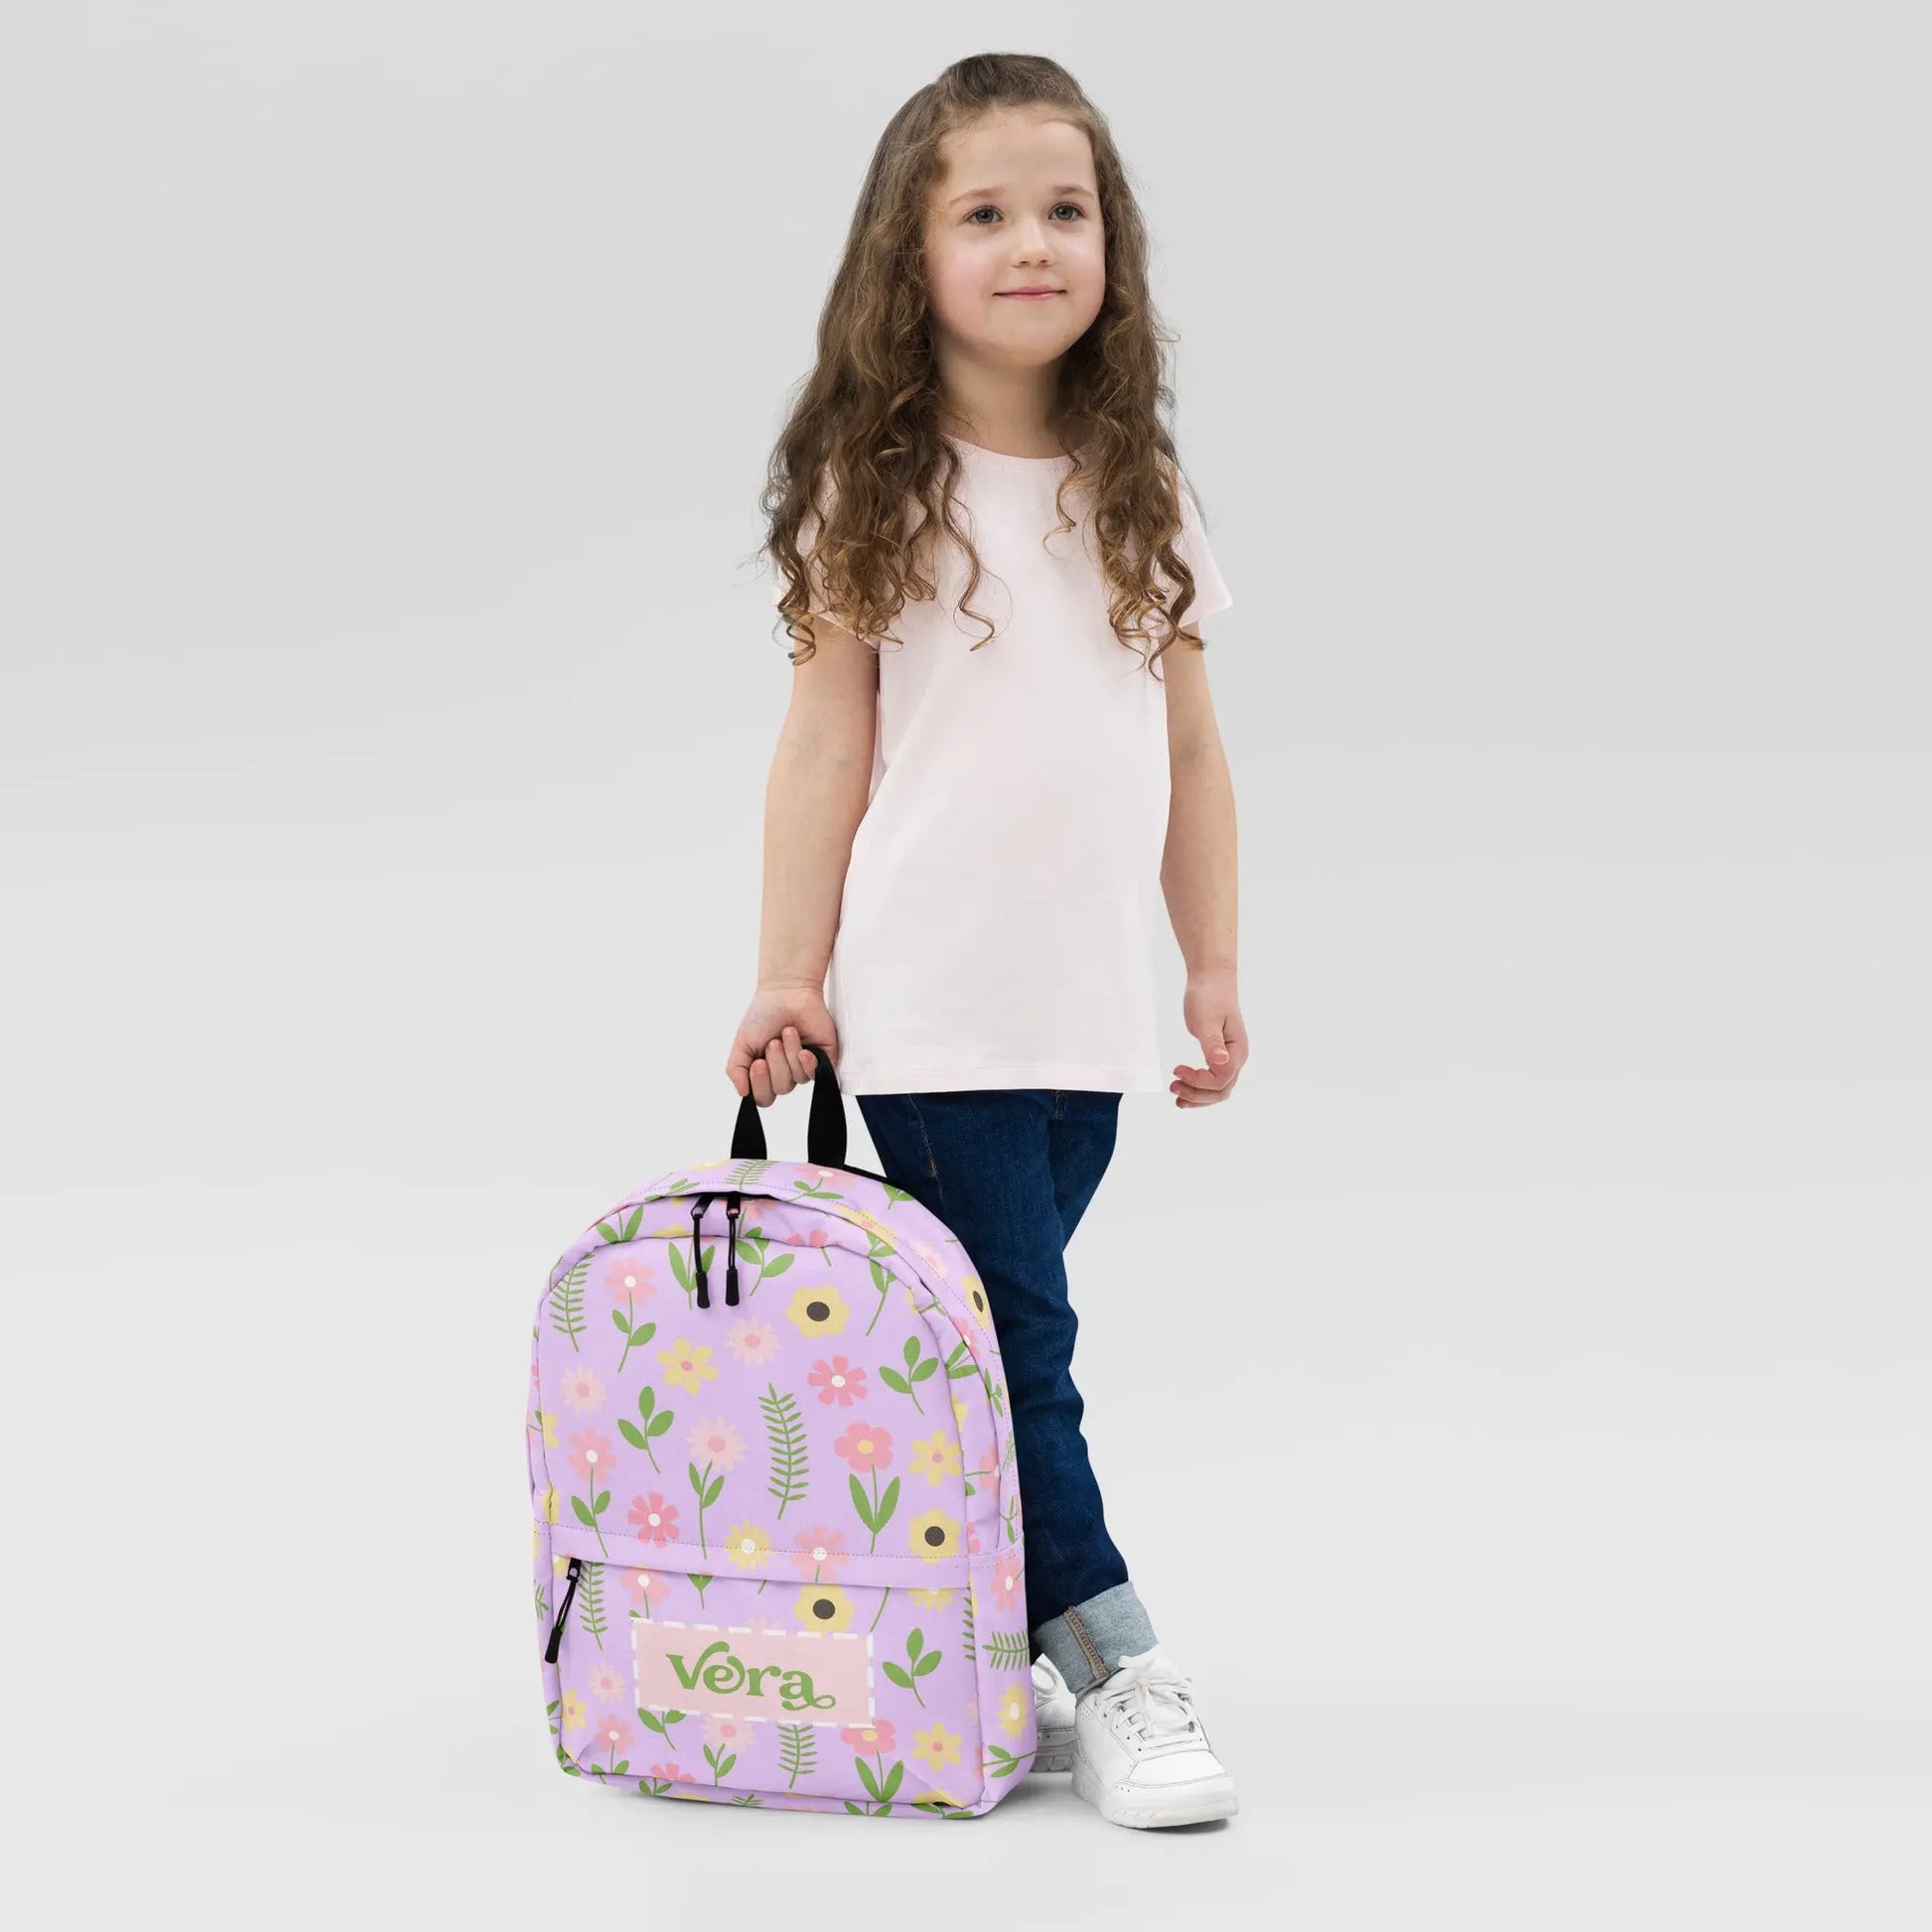 Purple Flowers Personalized Backpack Amazing Faith Designs